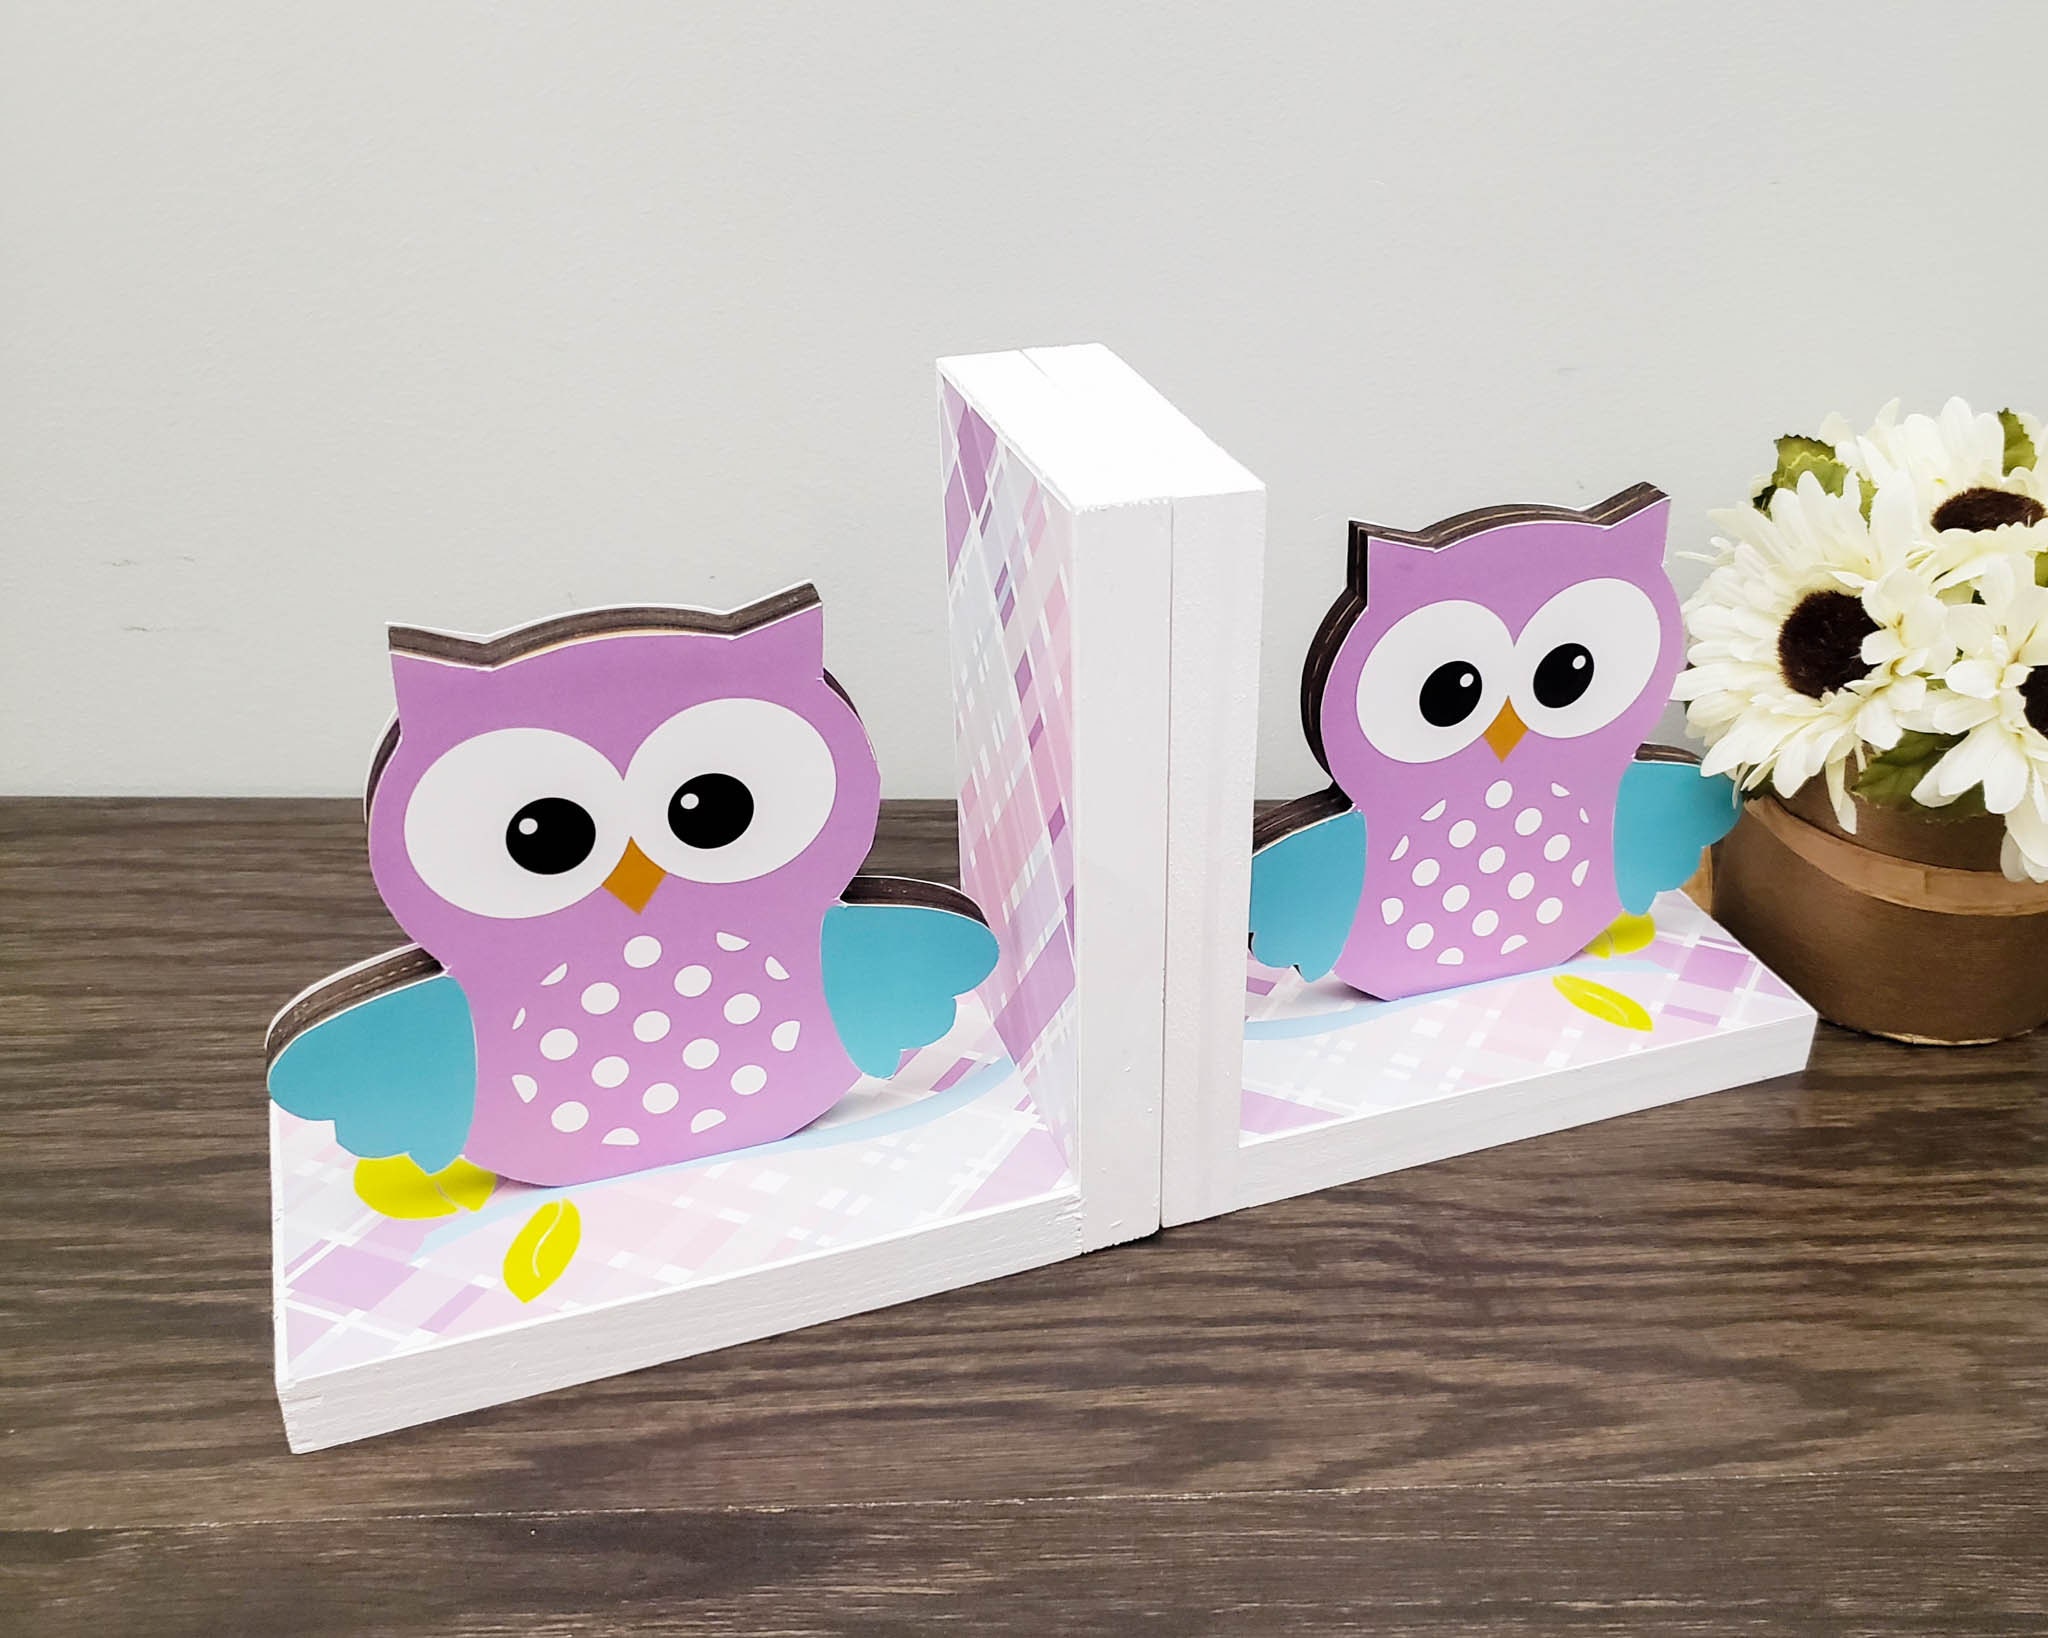 Wooden Owl Decorative Bookends Pink/Blue/Brown Bookends for Nursery Room Children's Room Decor Kids Gift Idea Brown Owl